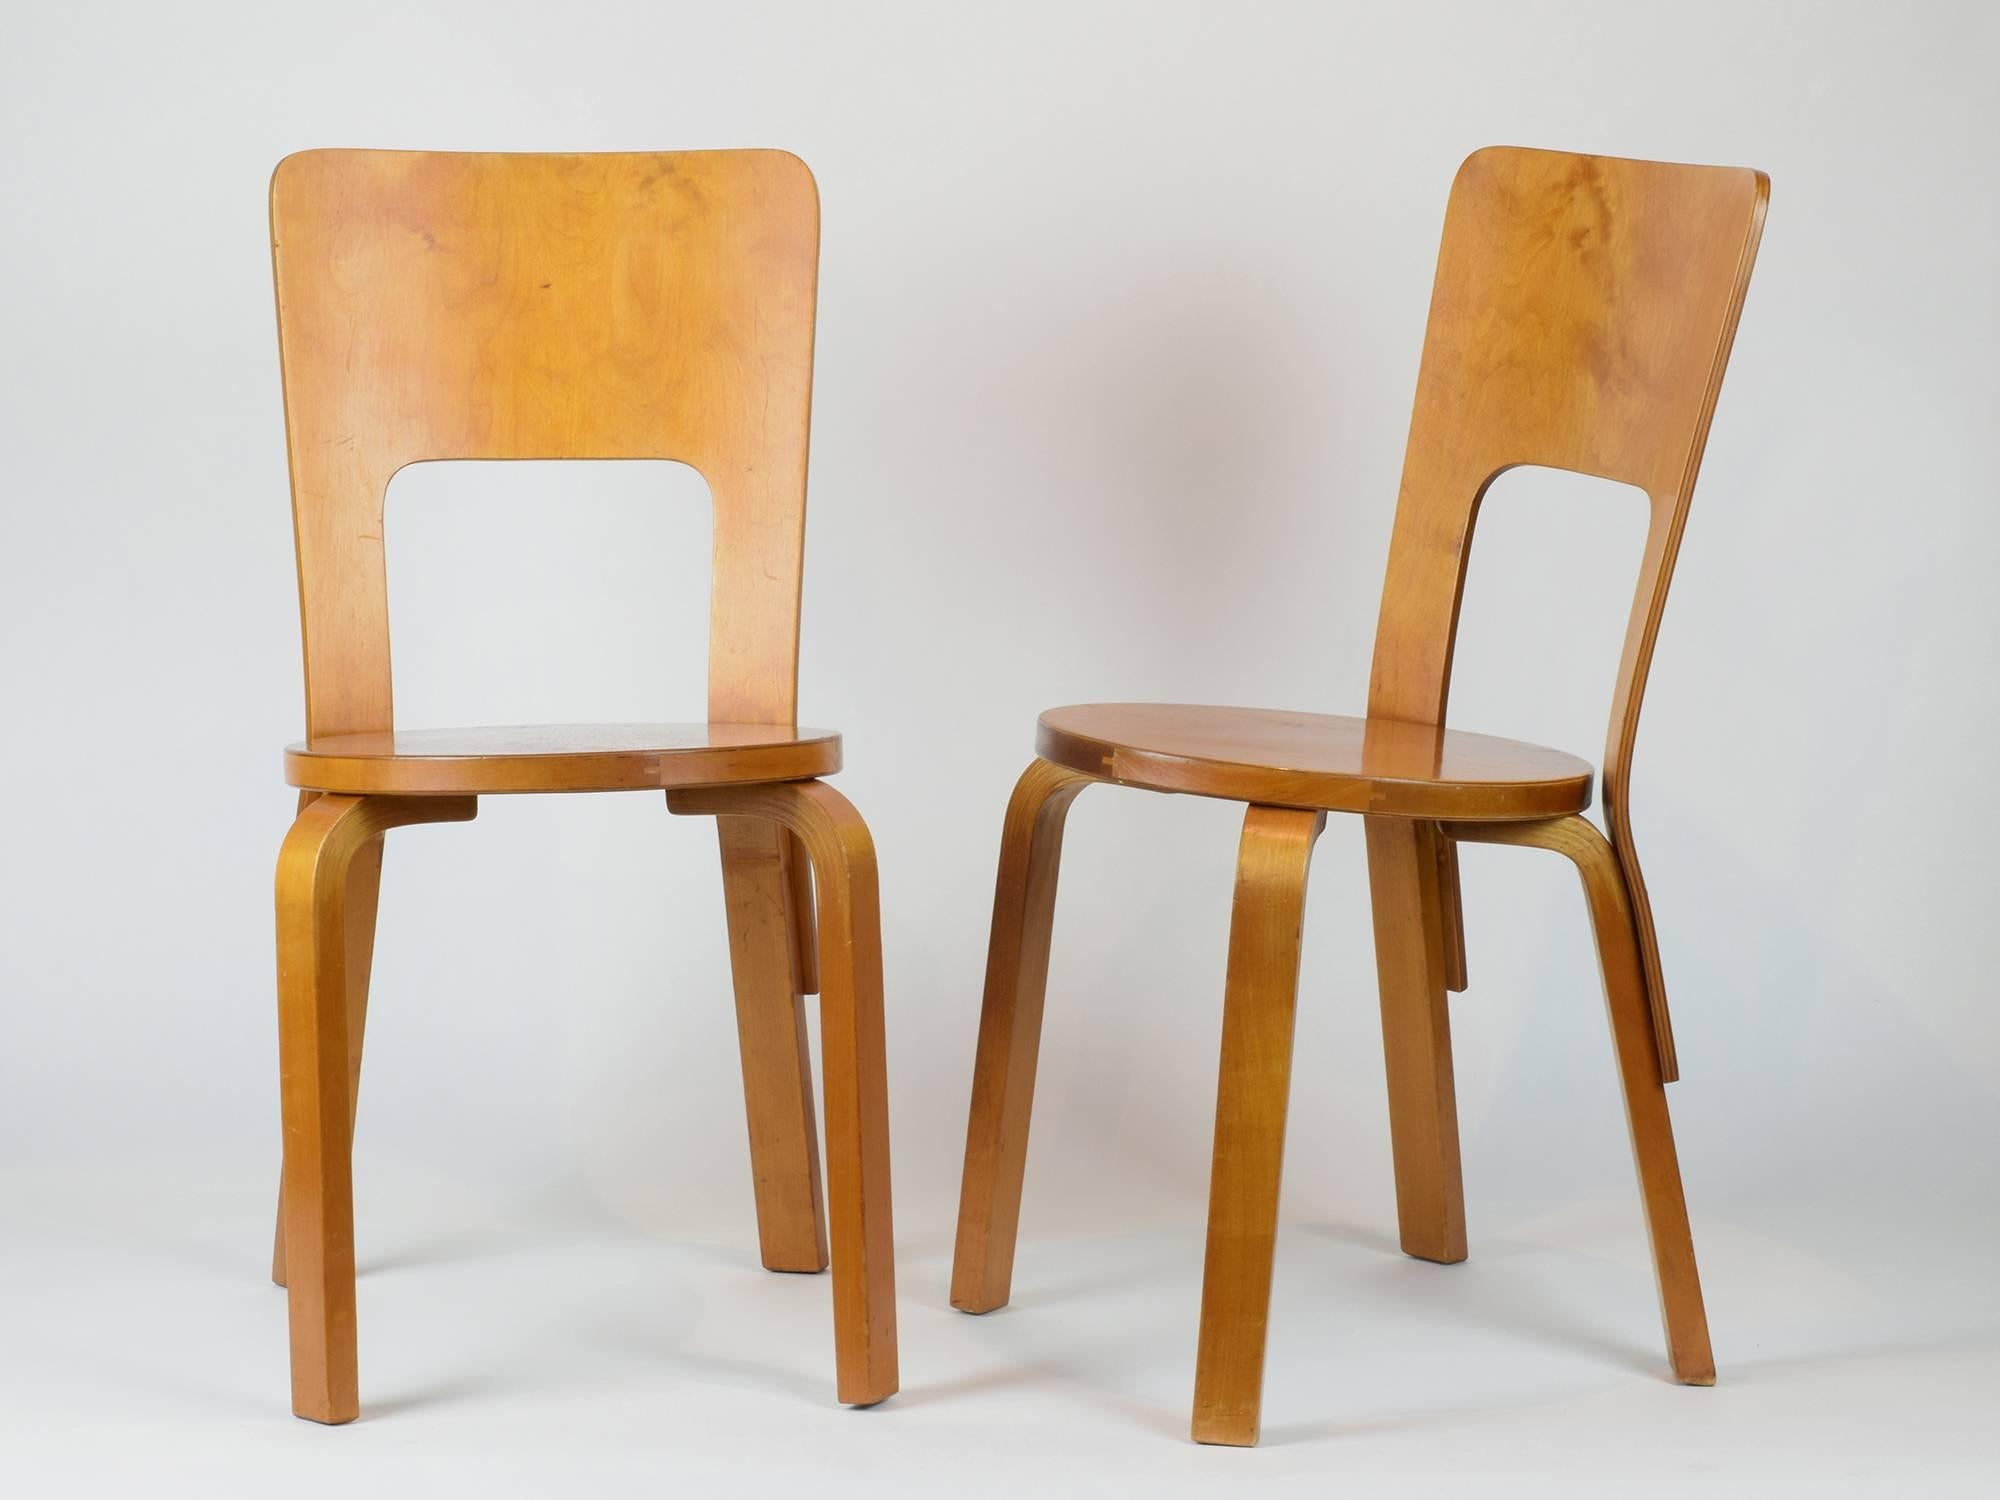 Alvar Aalto
Artek (manufacturer), Finland

Chair Model 66, 1933 (pair)

Birch and birch laminated plywood,
Original Finmar plastic label and Bowman Bros stamps to undersides.
Imported into the UK by Finmar, distributed by Bowman